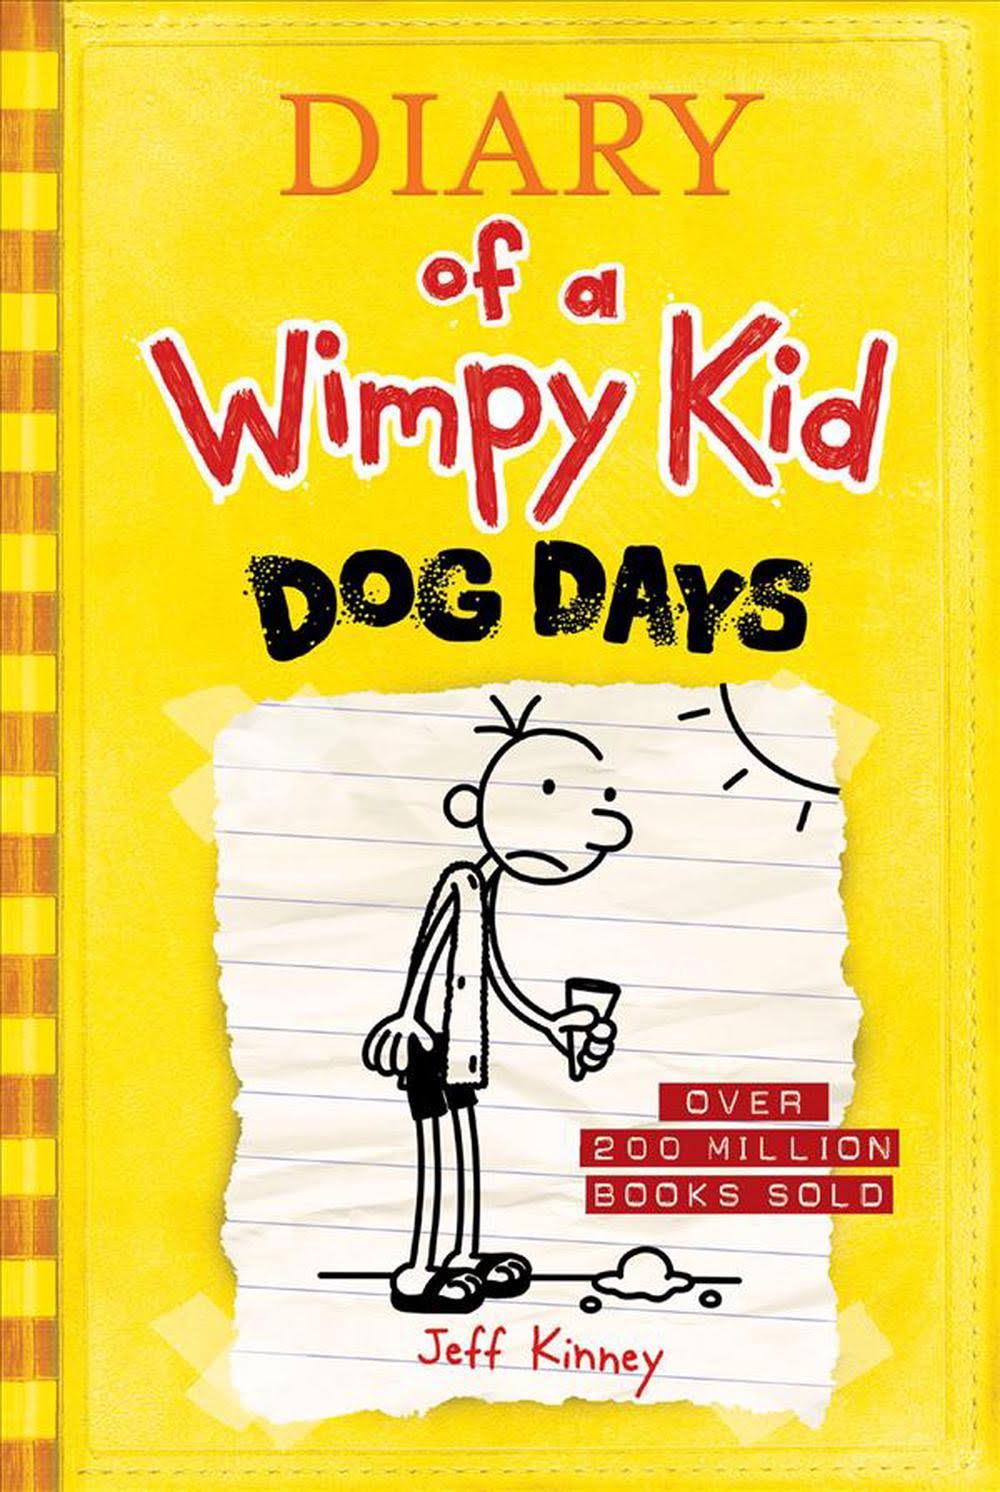 Dog Days (Diary of a Wimpy Kid #4) [Book]